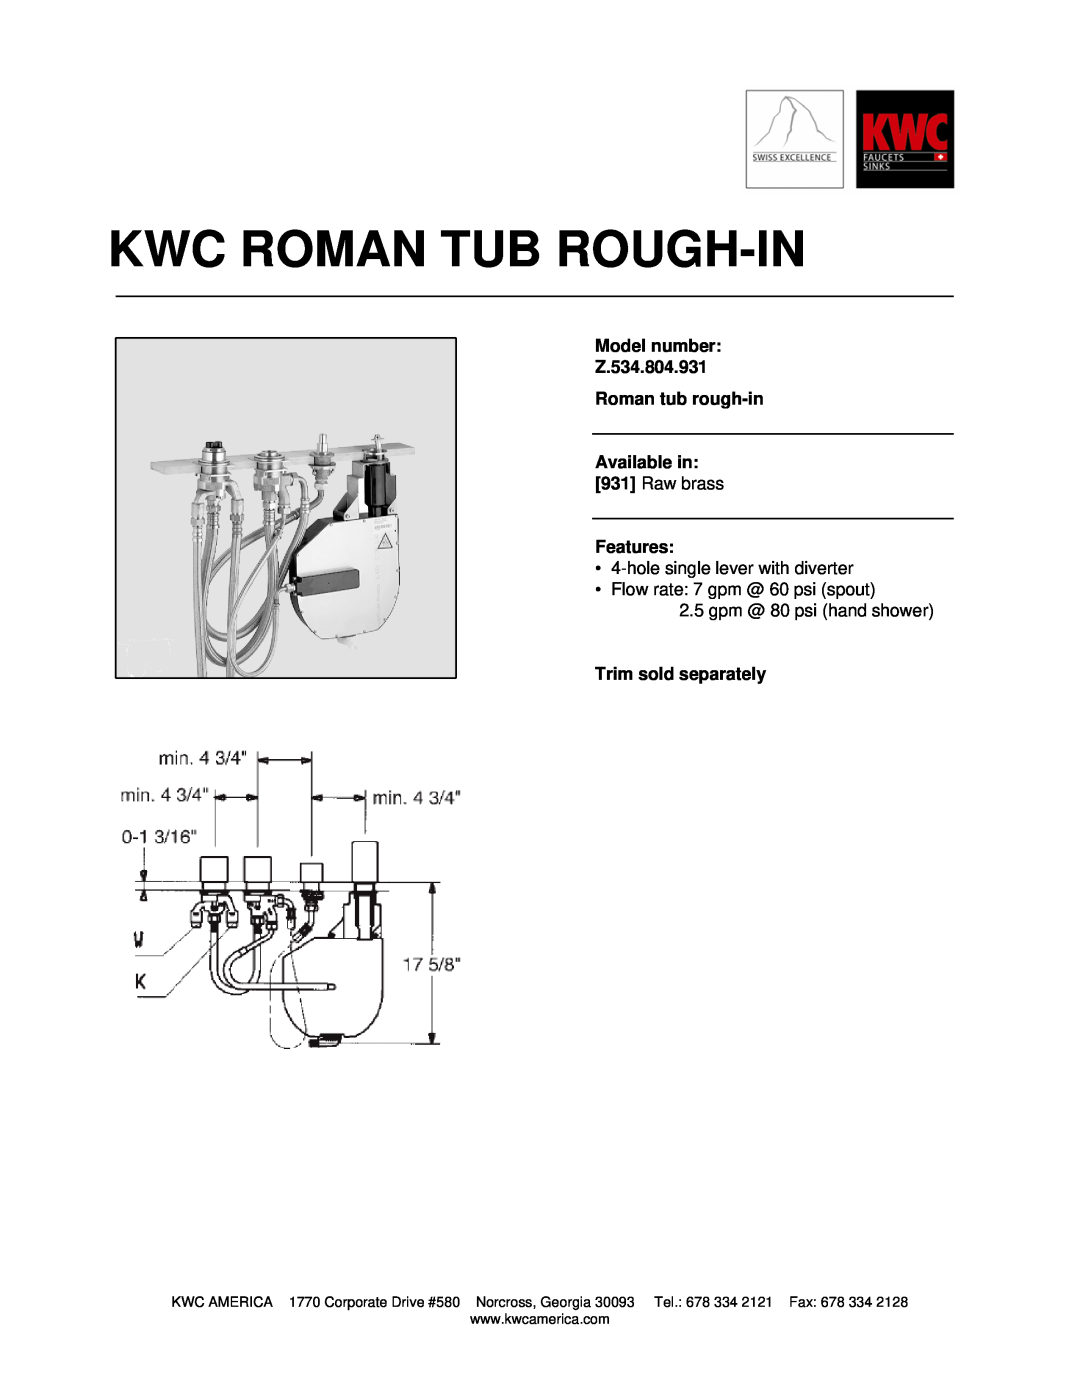 KWC manual Kwc Roman Tub Rough-In, Model number Z.534.804.931 Roman tub rough-in, Available in, Raw brass, Features 